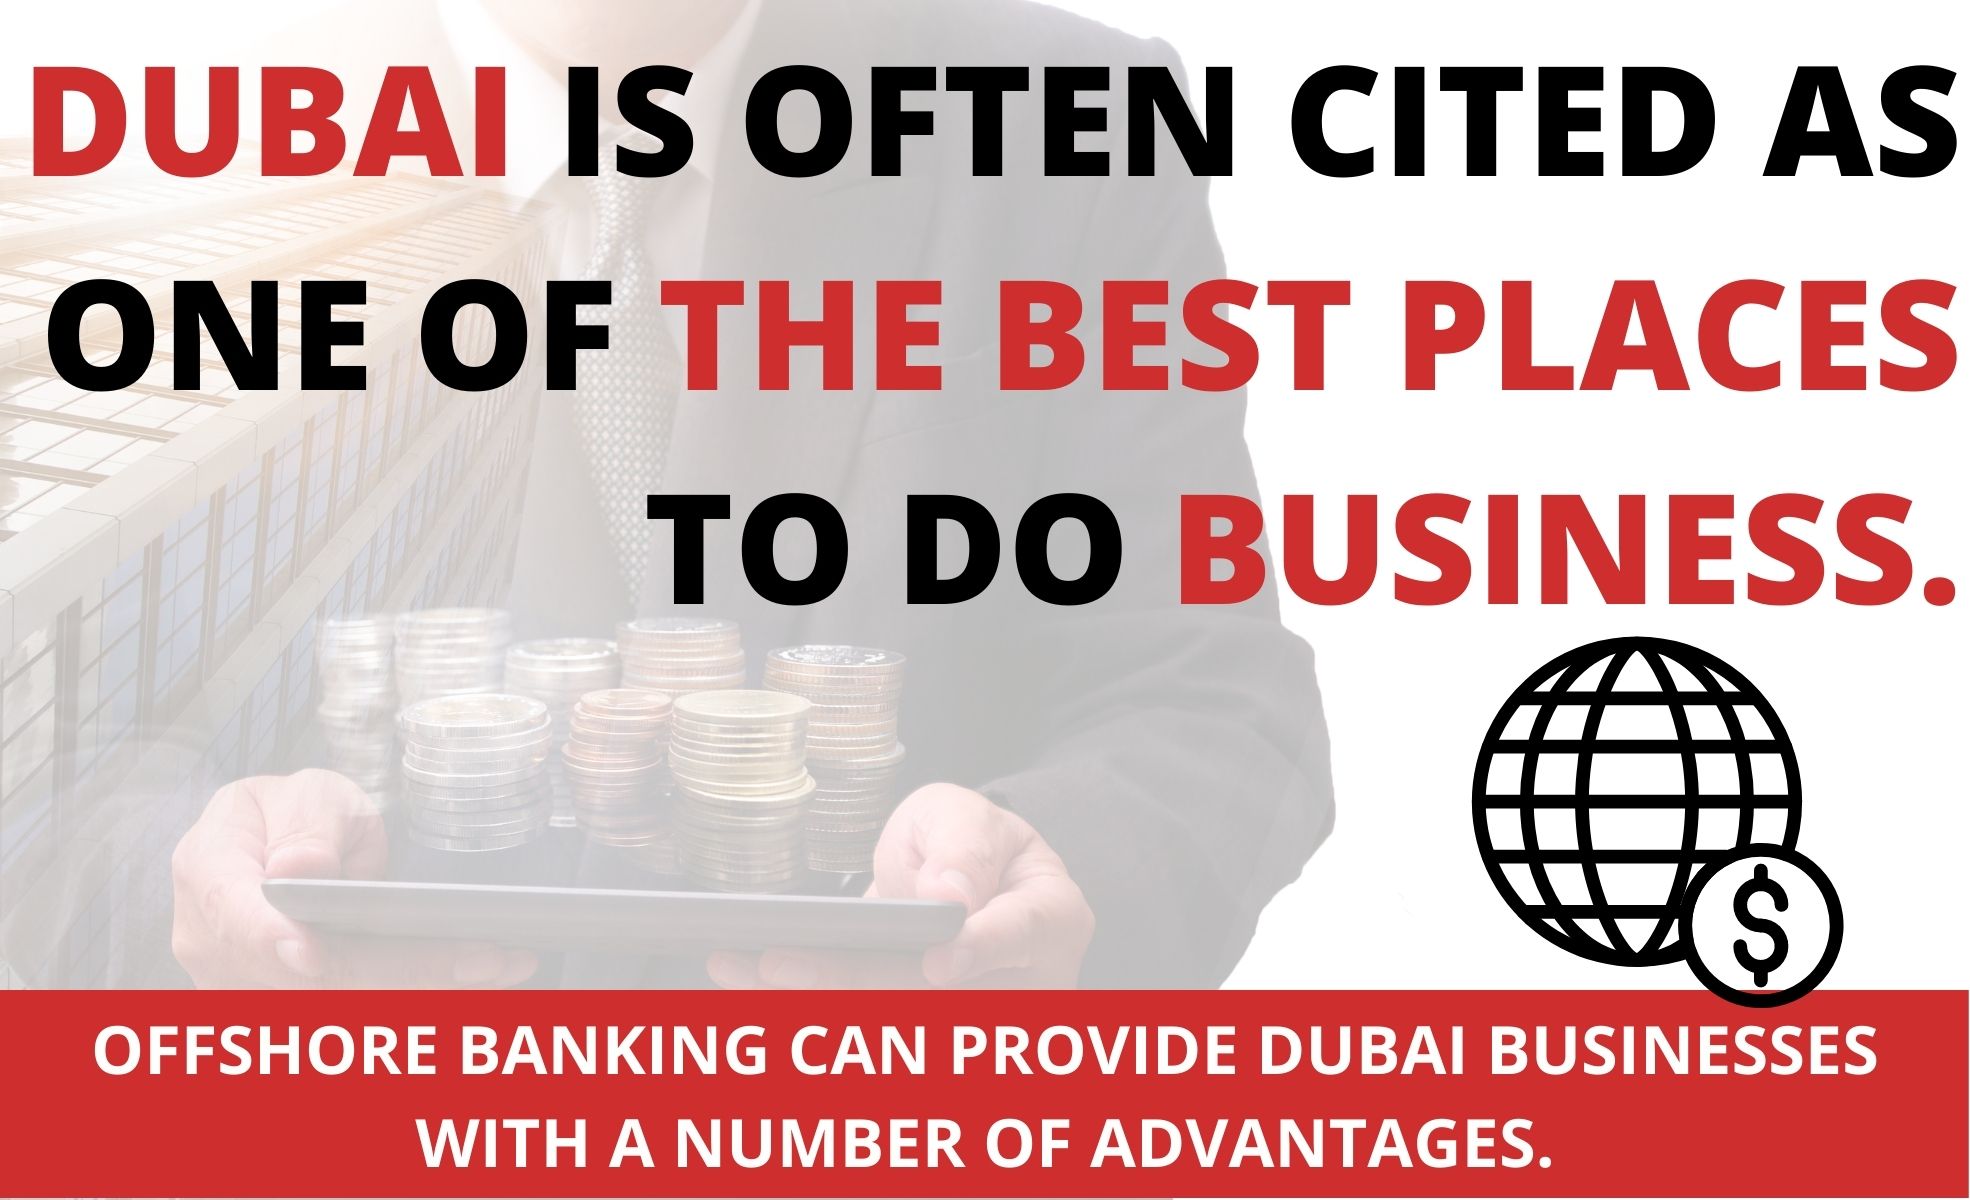 An infographic about international banking for businesses in Dubai